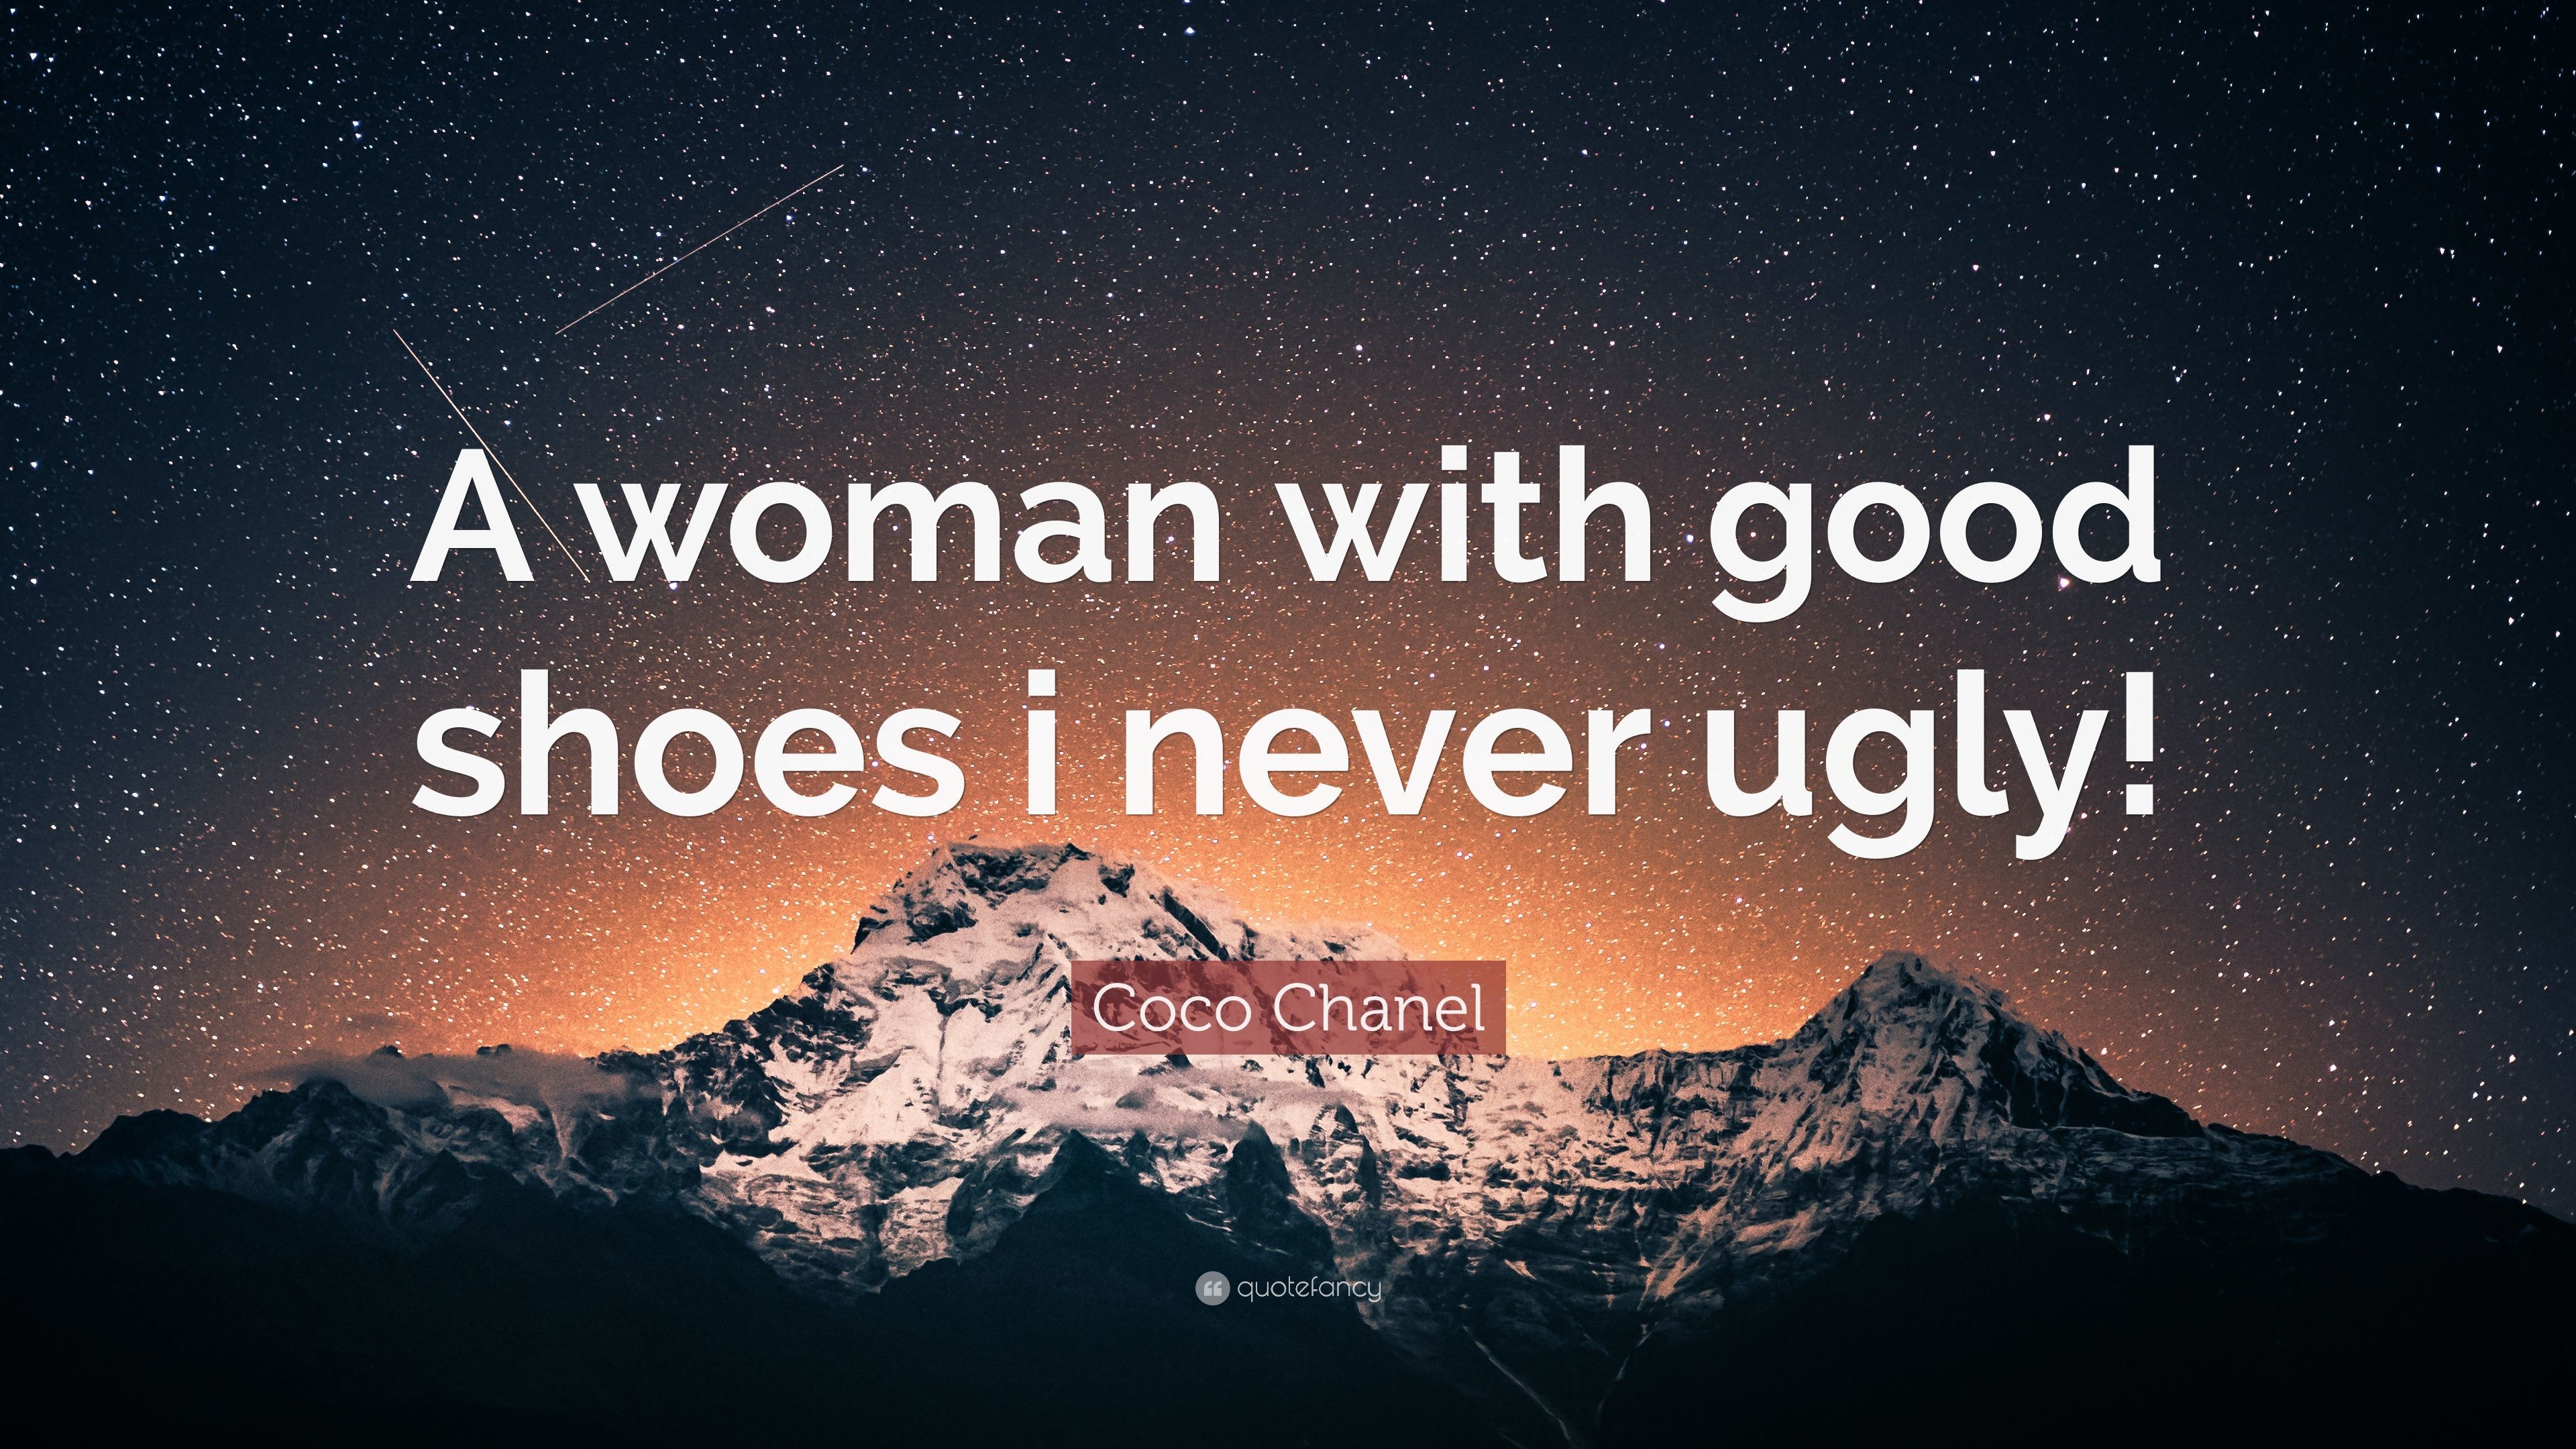 3840x2160 Coco Chanel Quote: “A woman with good shoes i never ugly!”